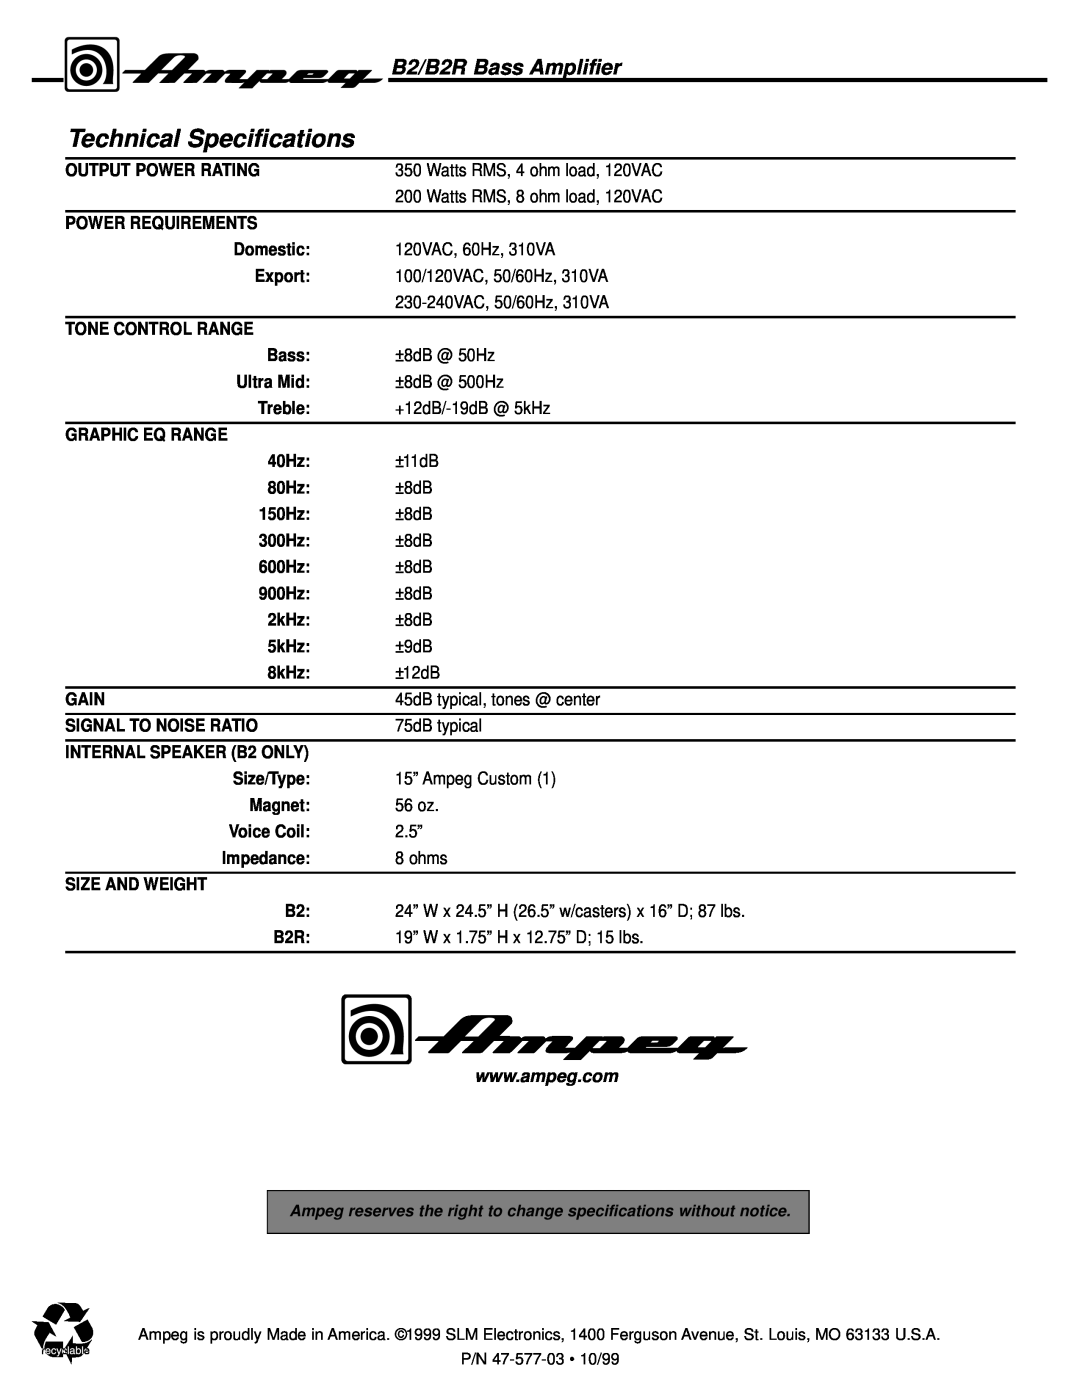 Ampeg manual Technical Specifications, B2/B2R Bass Amplifier 